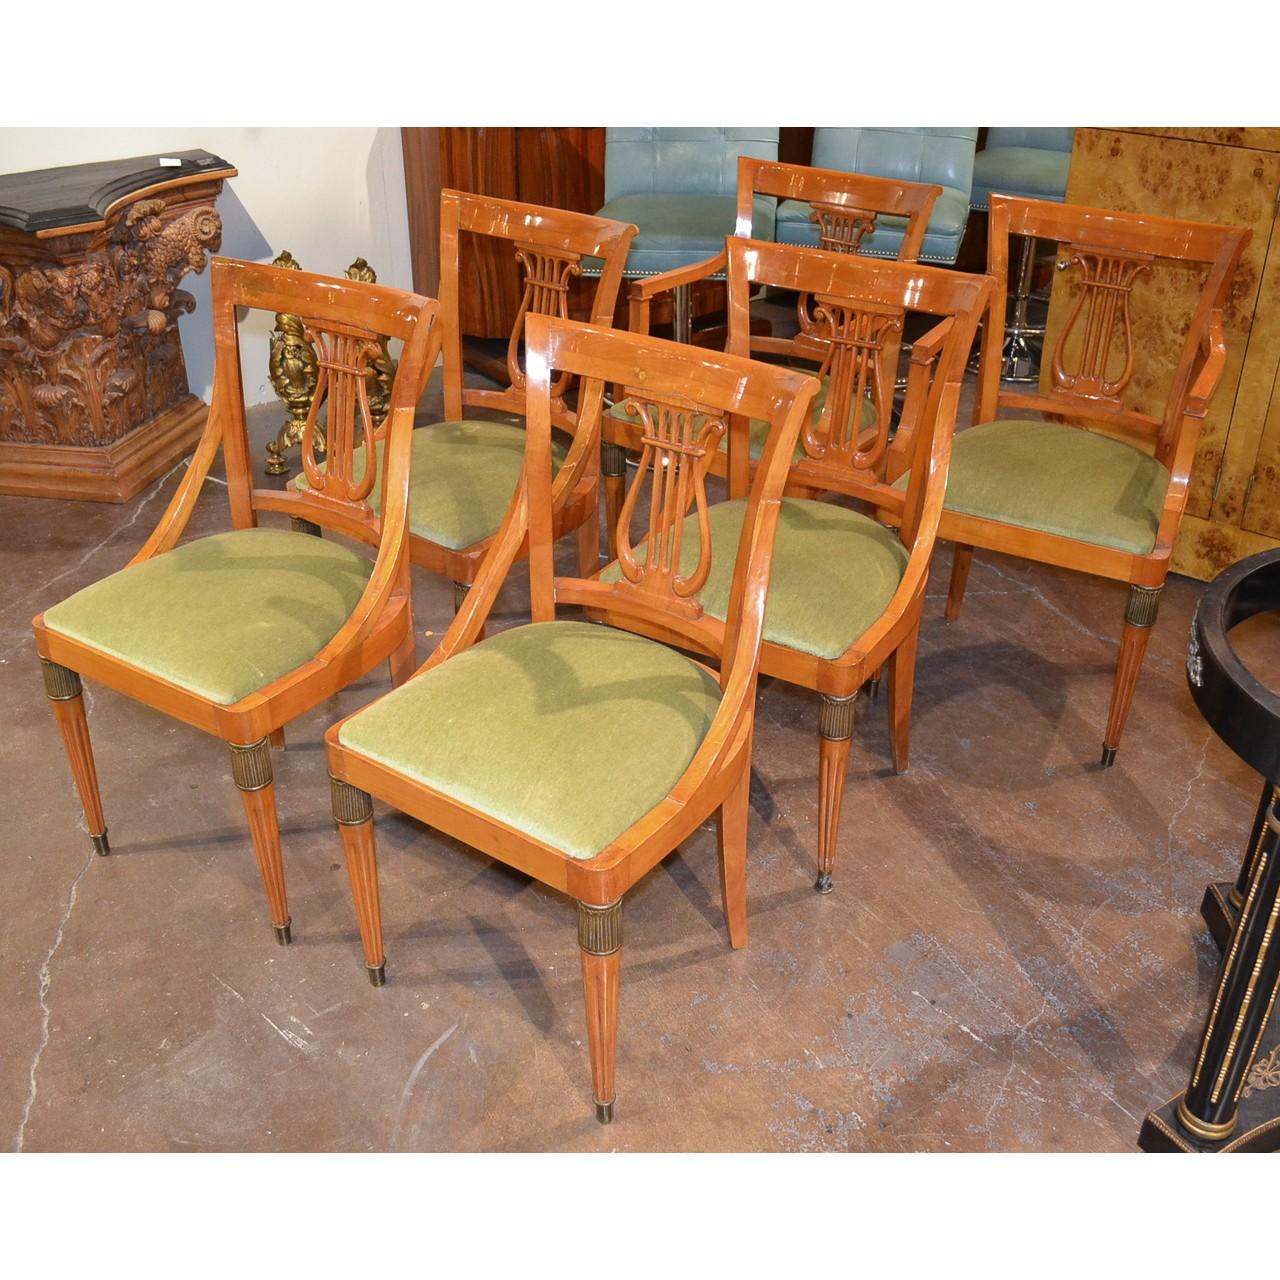 Fabulous set of six Austrian Biedermeier carved maple dining chairs with a beautifully aged patina and comprising two armchairs and four side chairs. Sleek contoured backs with lyre designed splats. The front legs fluted and tapered with brass